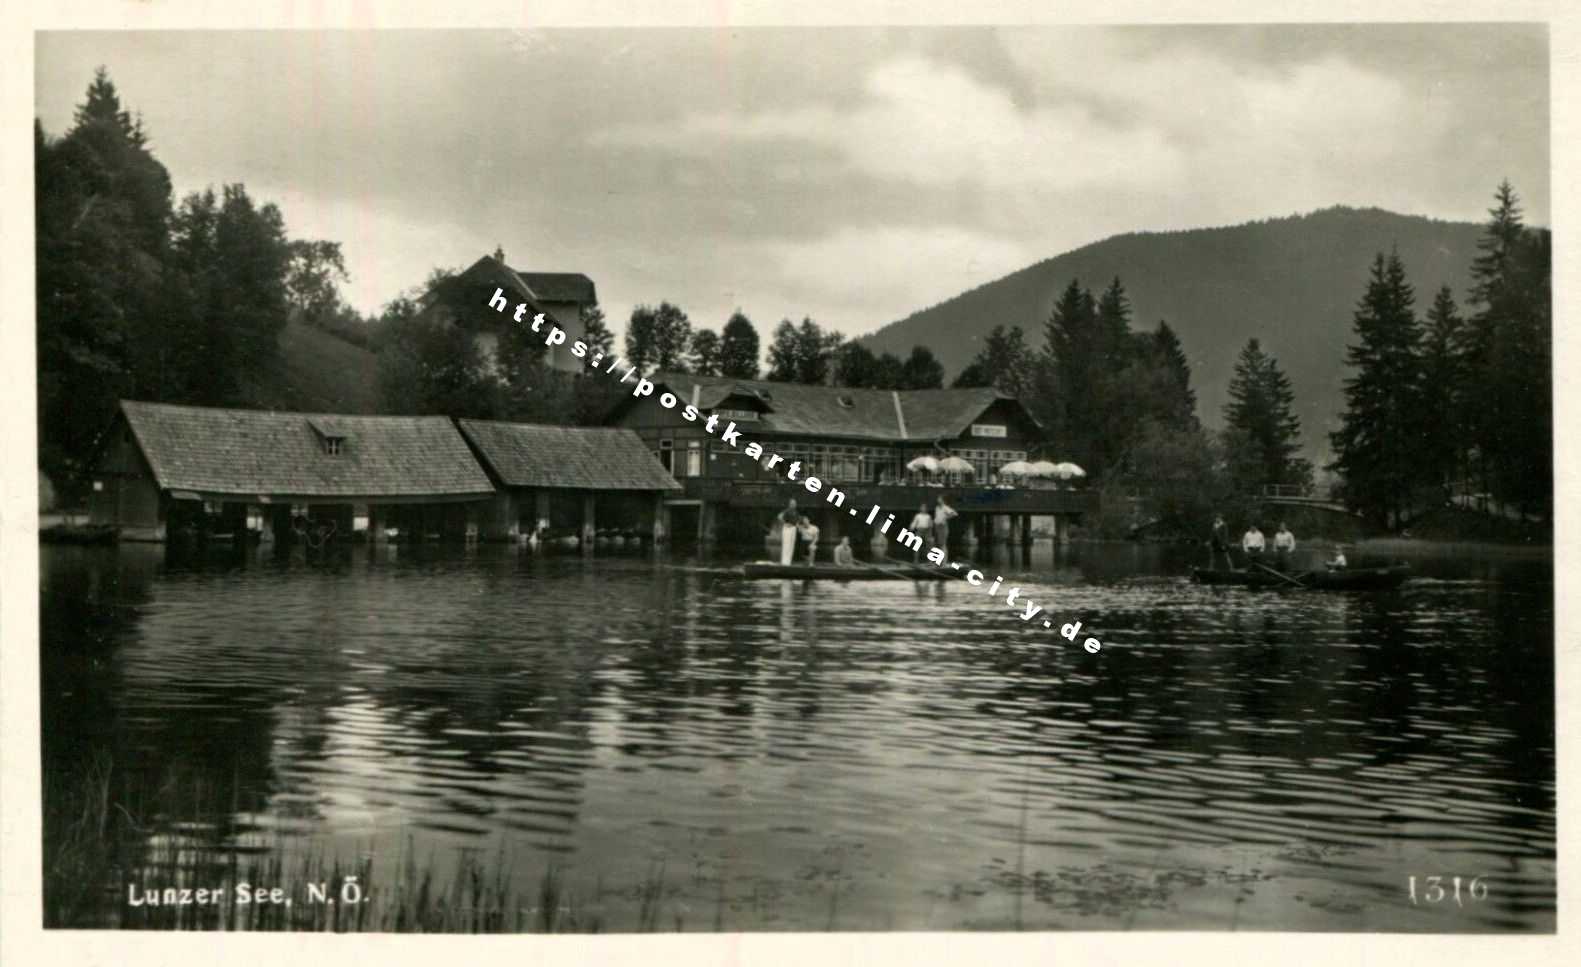 Lunzer See 1949